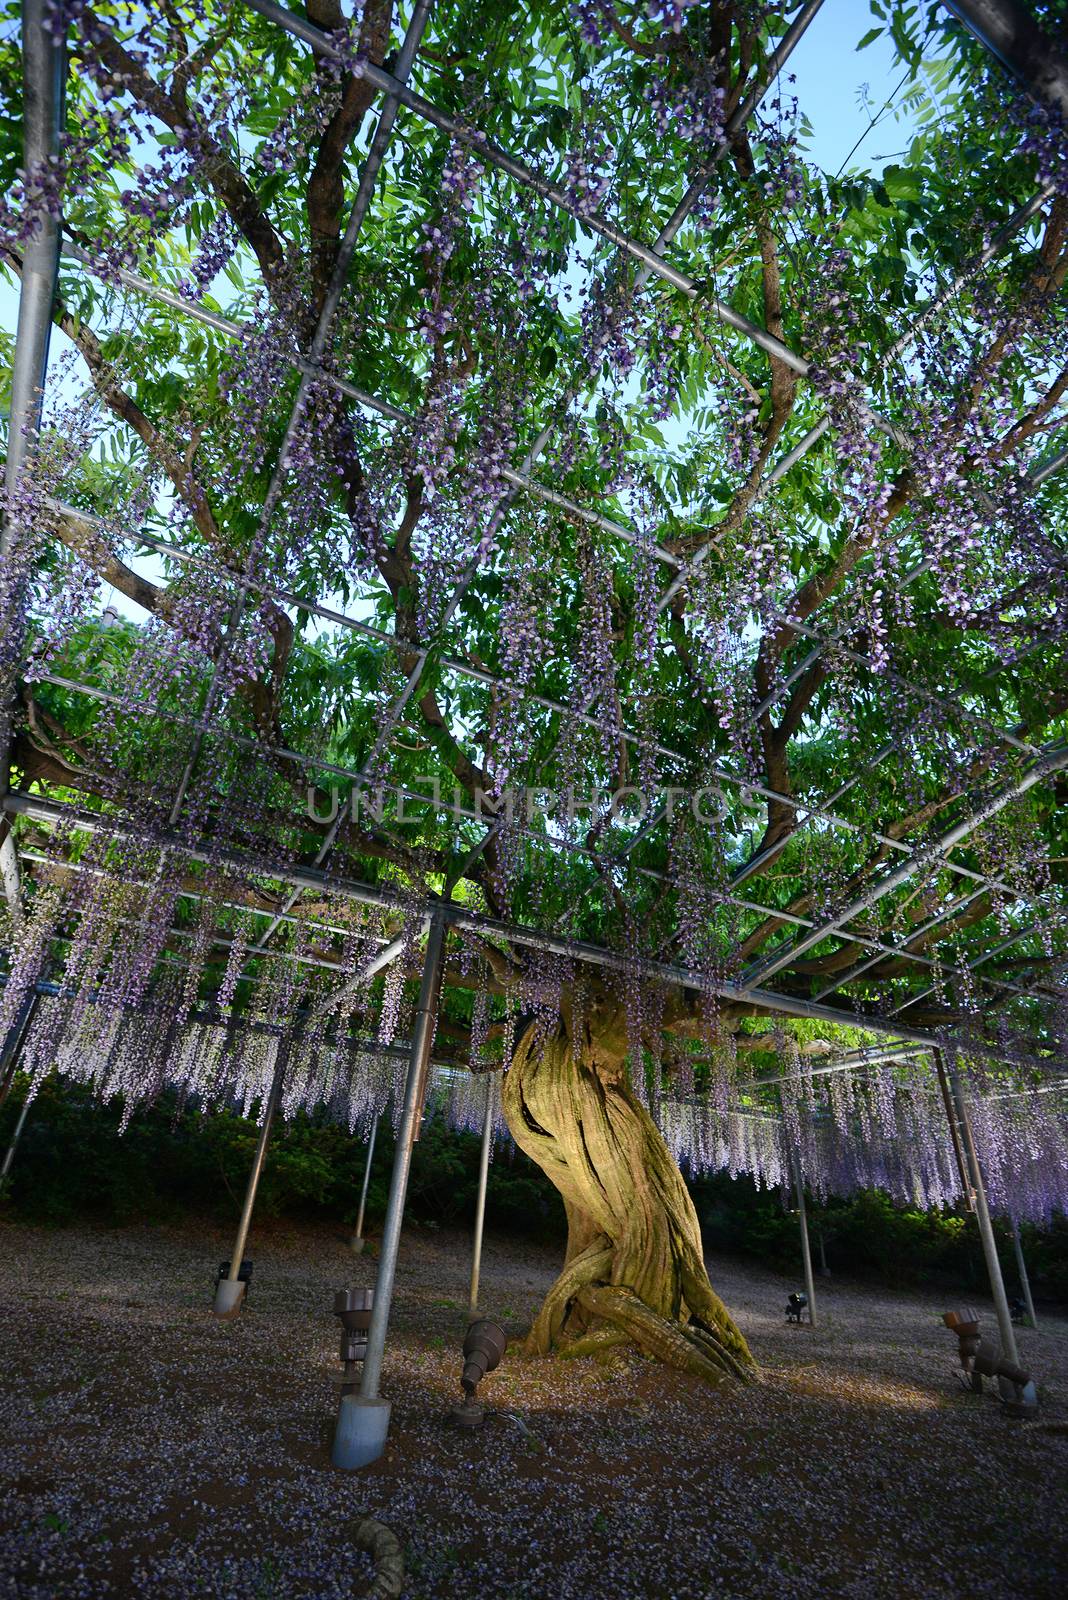 wisteria flowers in japan with illumination